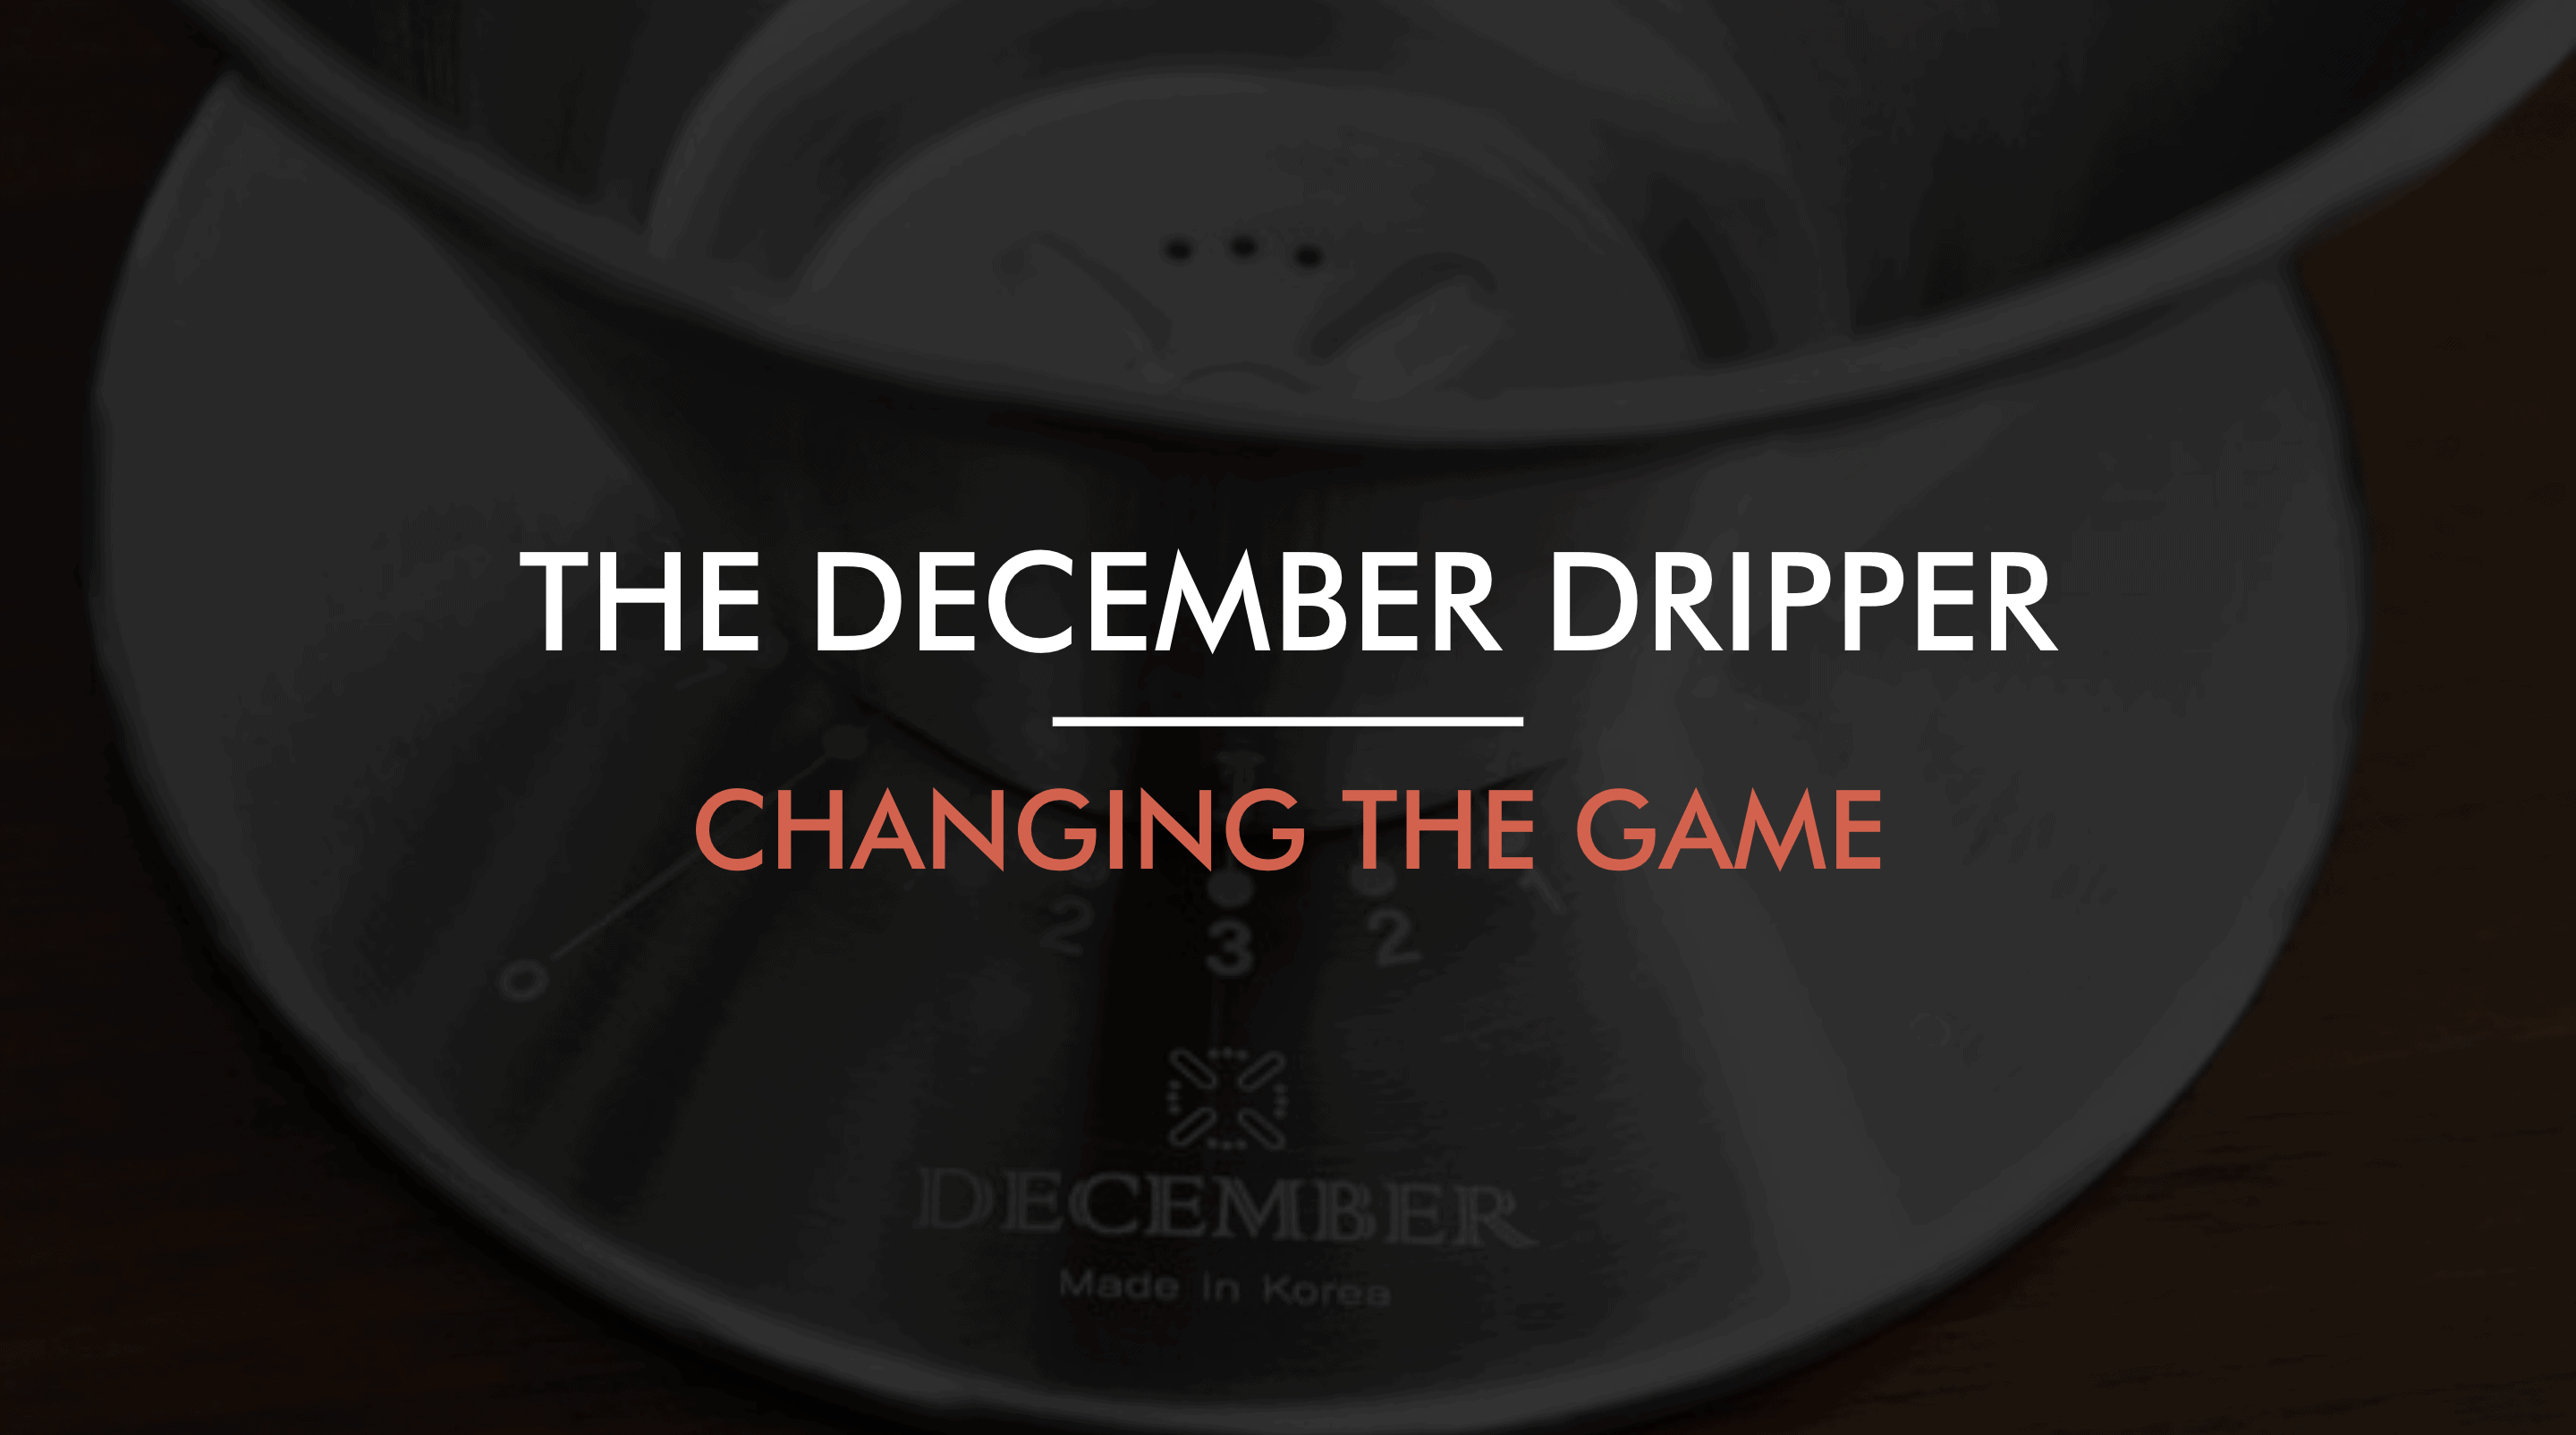 The December Dripper changes the pour-over game